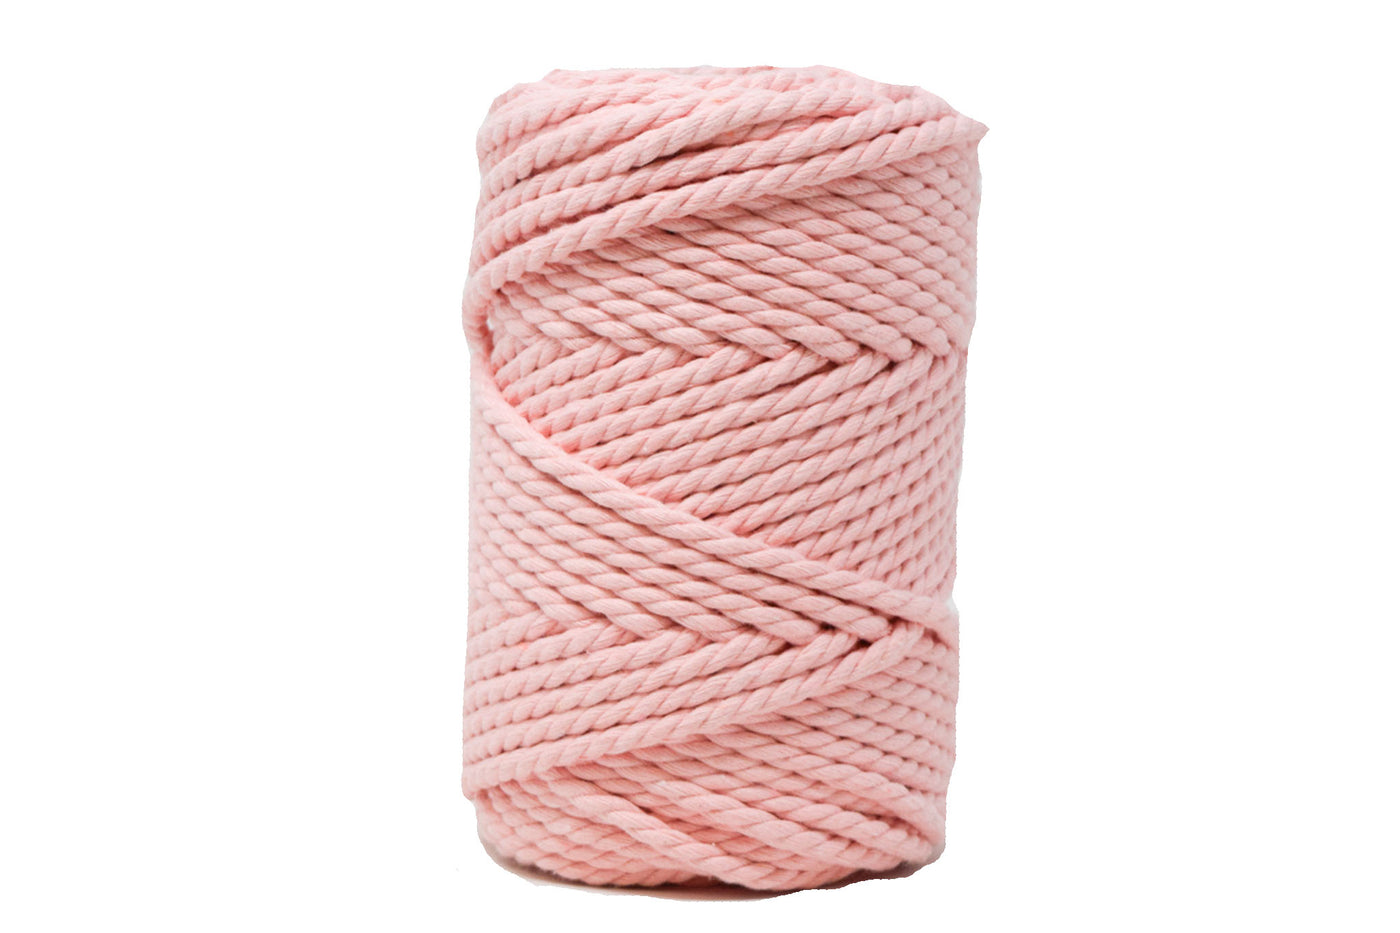 OUTLET COTTON ROPE ZERO WASTE 5 MM - 3 PLY